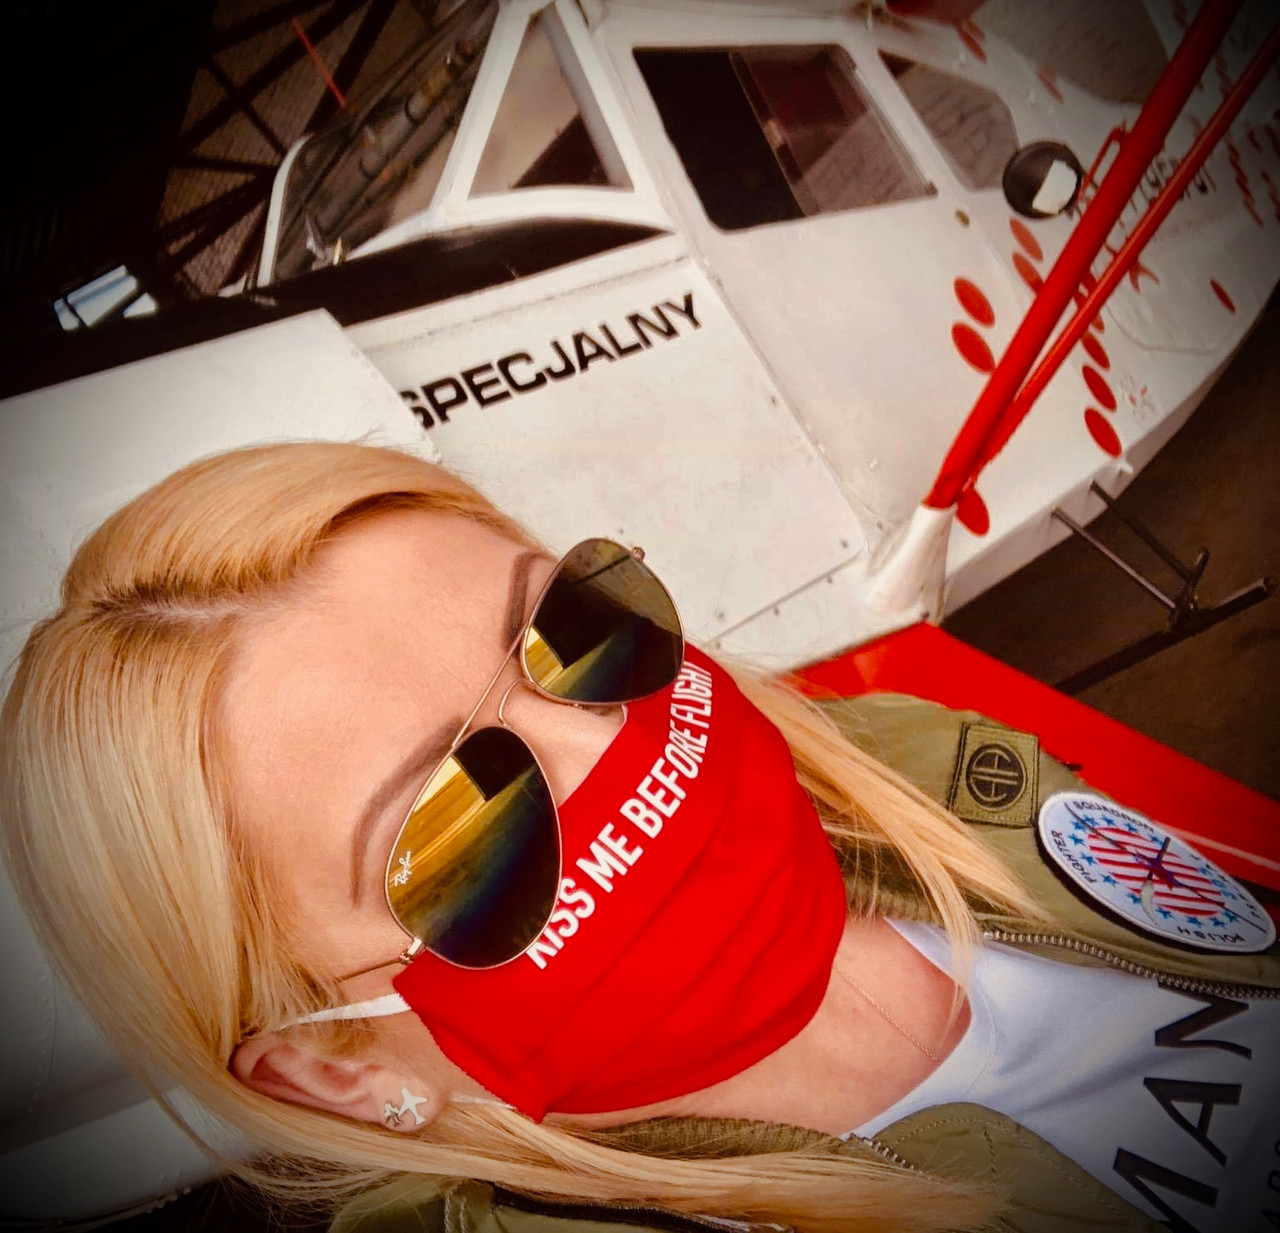 Reusable Aviation Mask: "KISS ME BEFORE FLIGHT" (Colour: RED) (Mask-6)